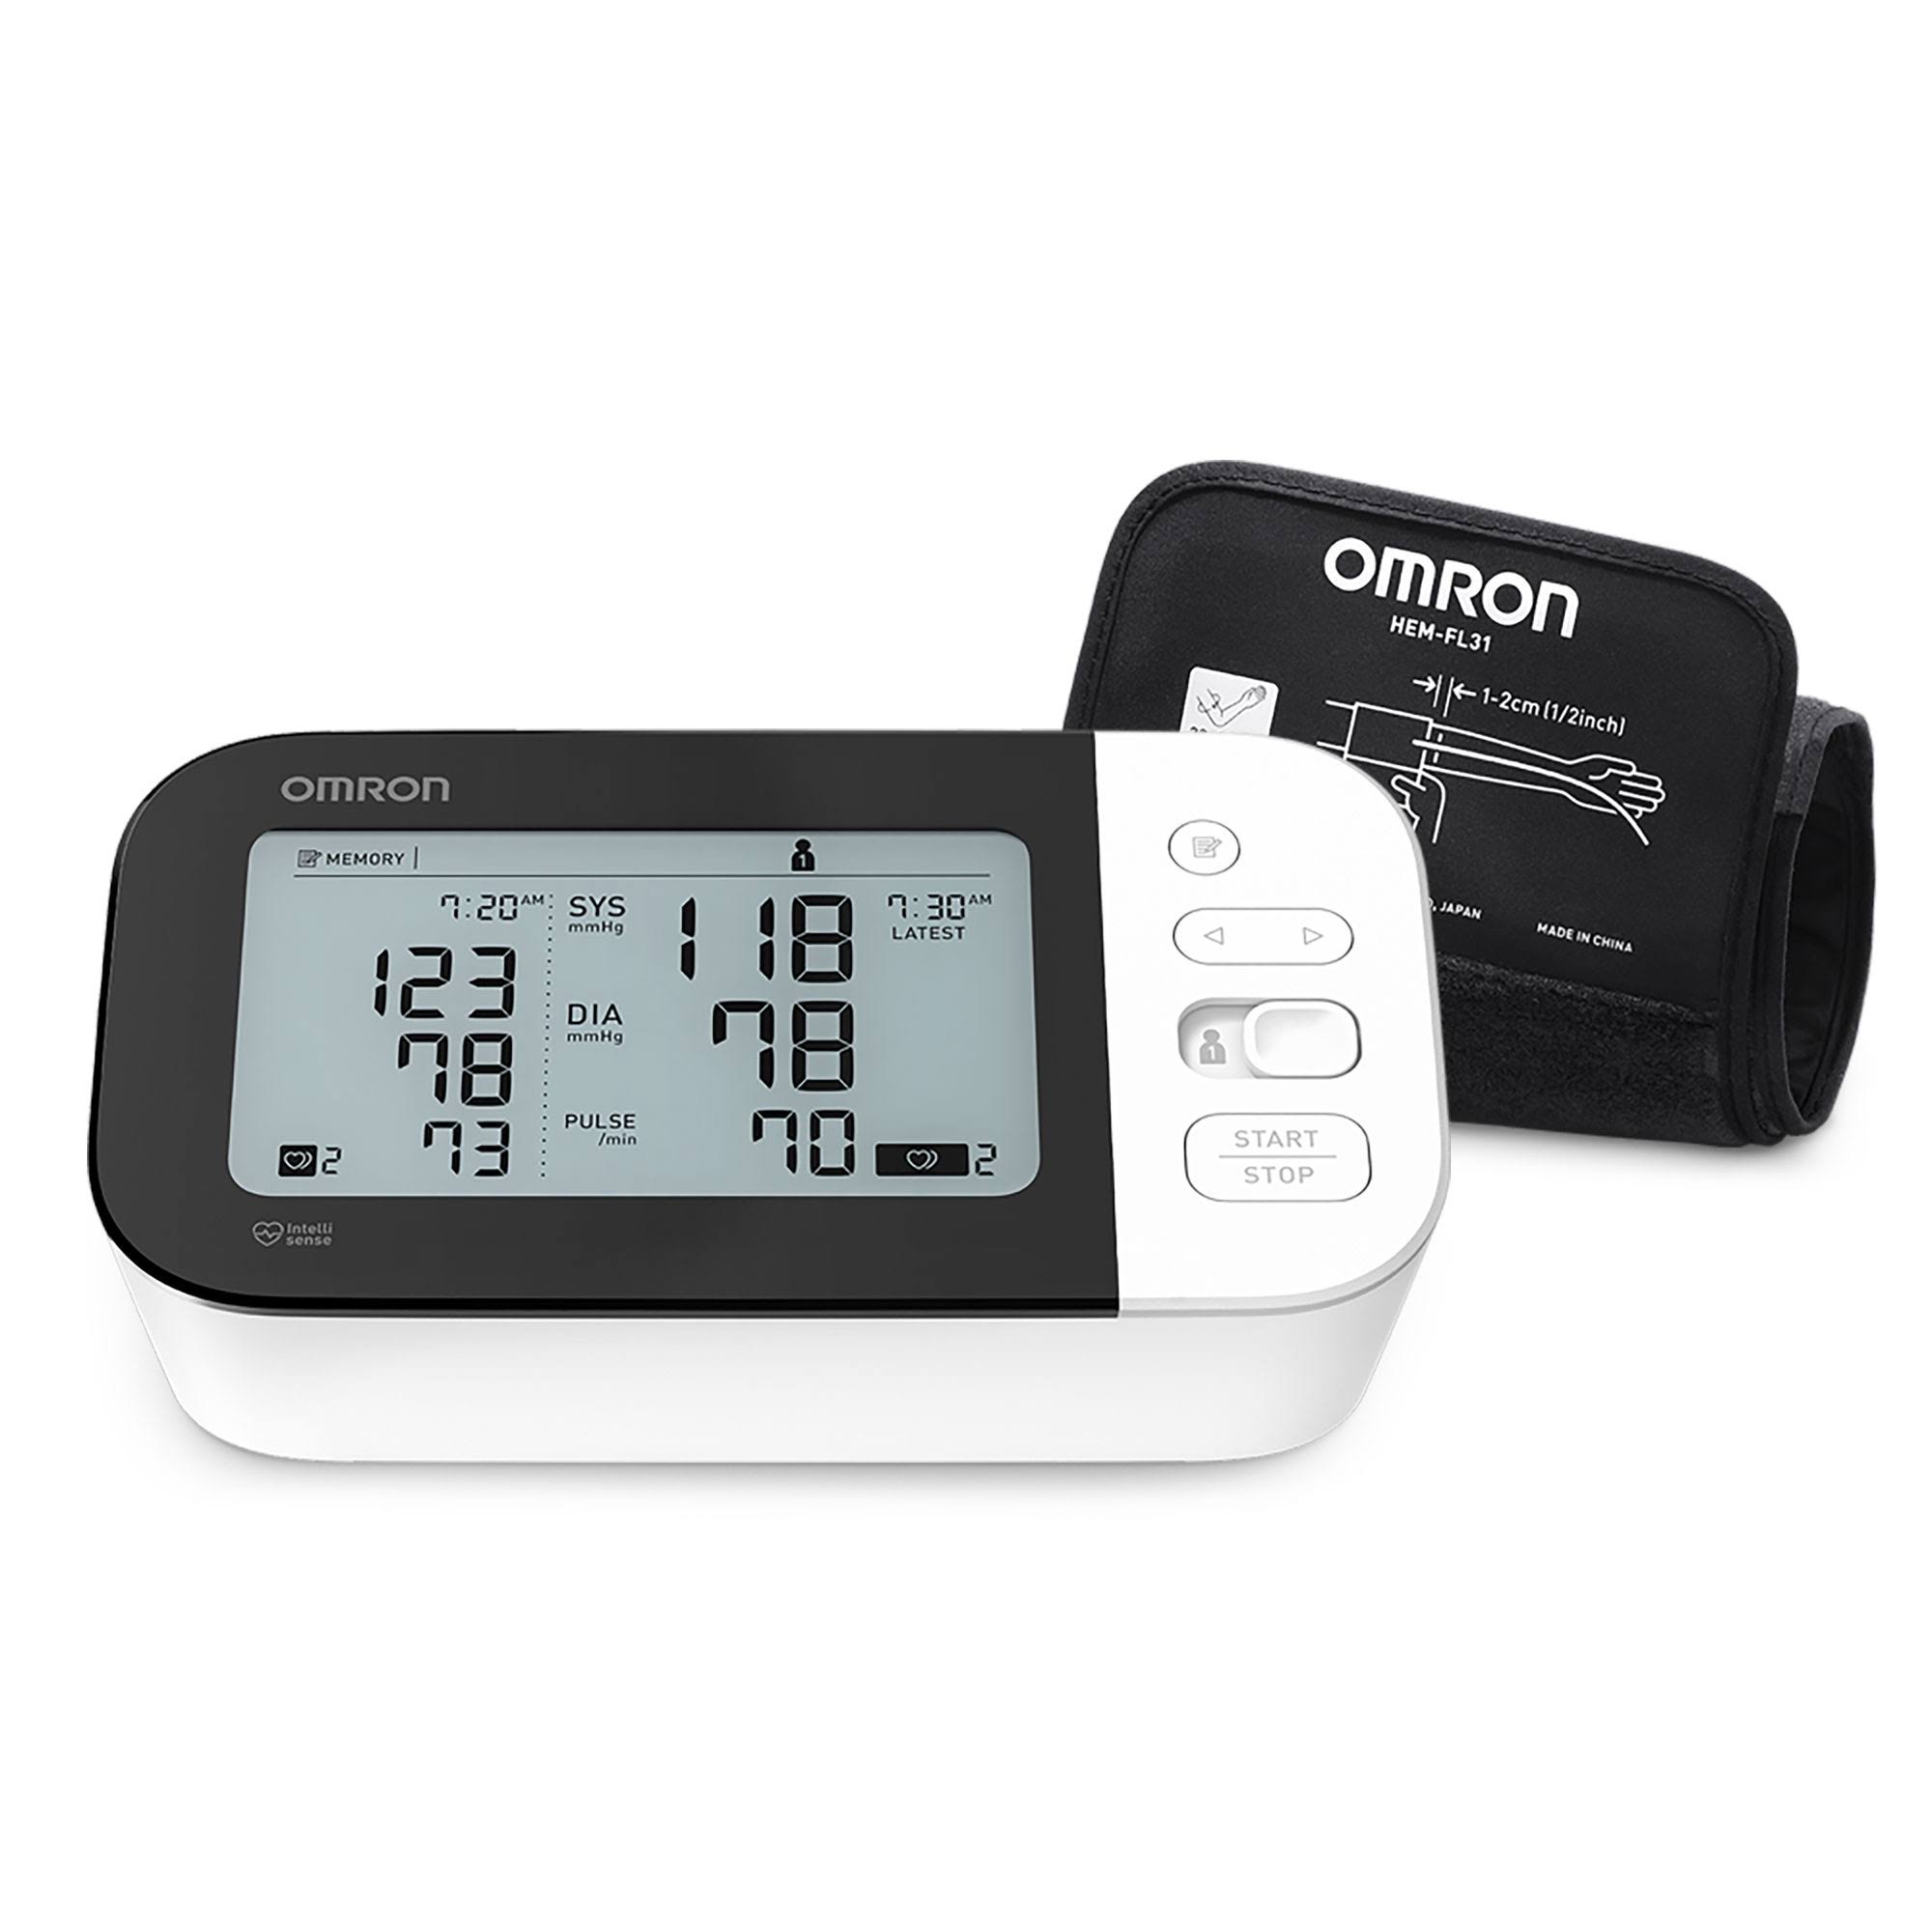 Omron 7 Series Upper Arm Blood Pressure Monitor - 22cm to 42cm